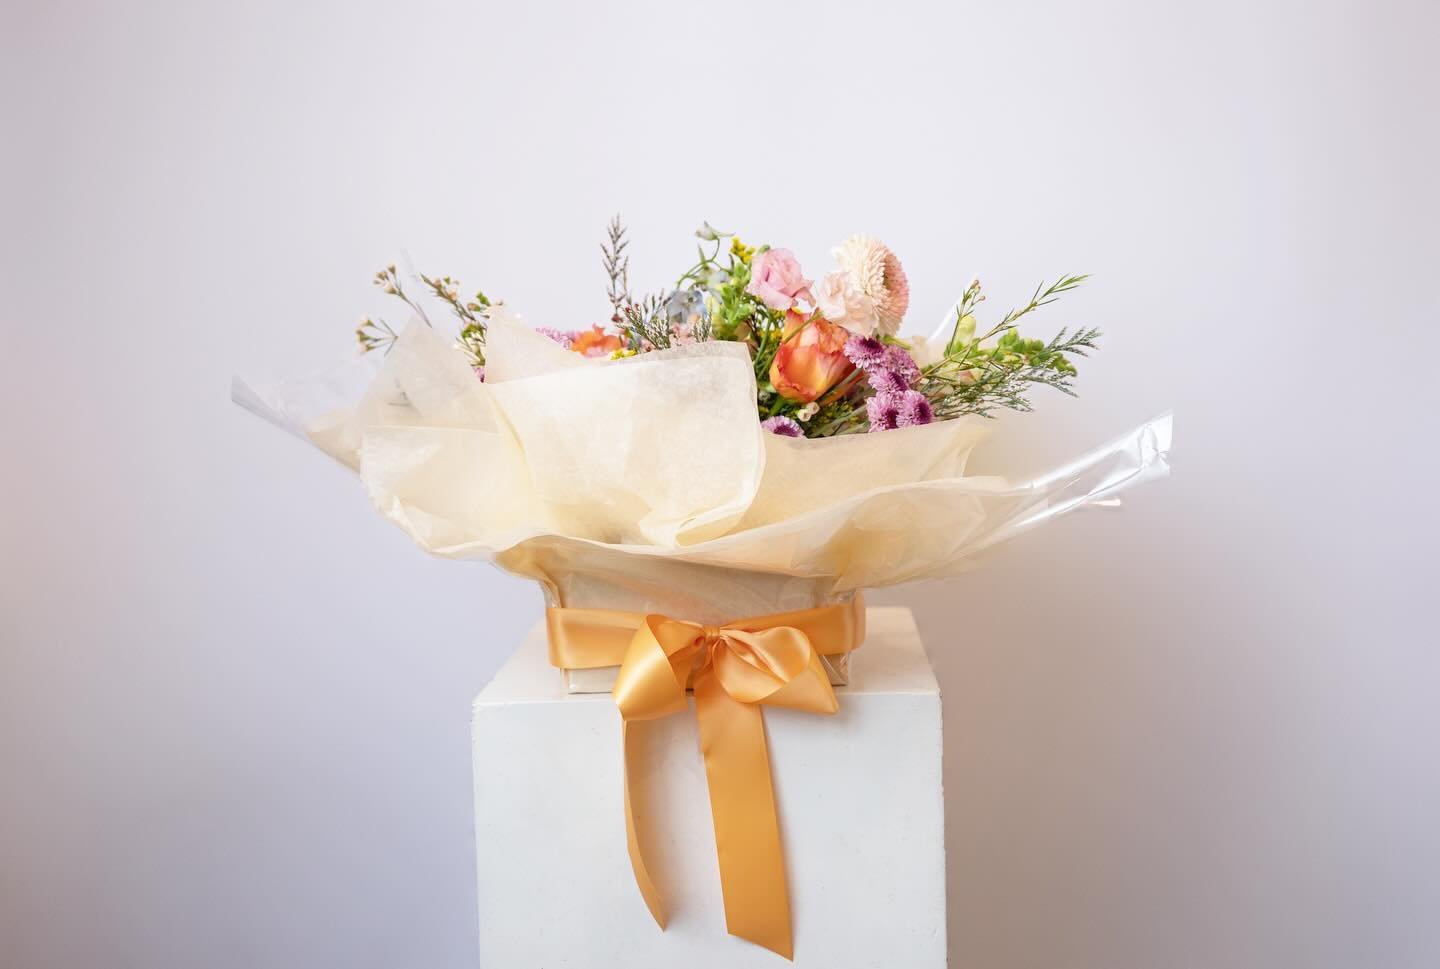 The packaging 🤤 you can select packaging when placing your order for any arrangement so your special someone will receive their flowers with this gorgeous presentation!